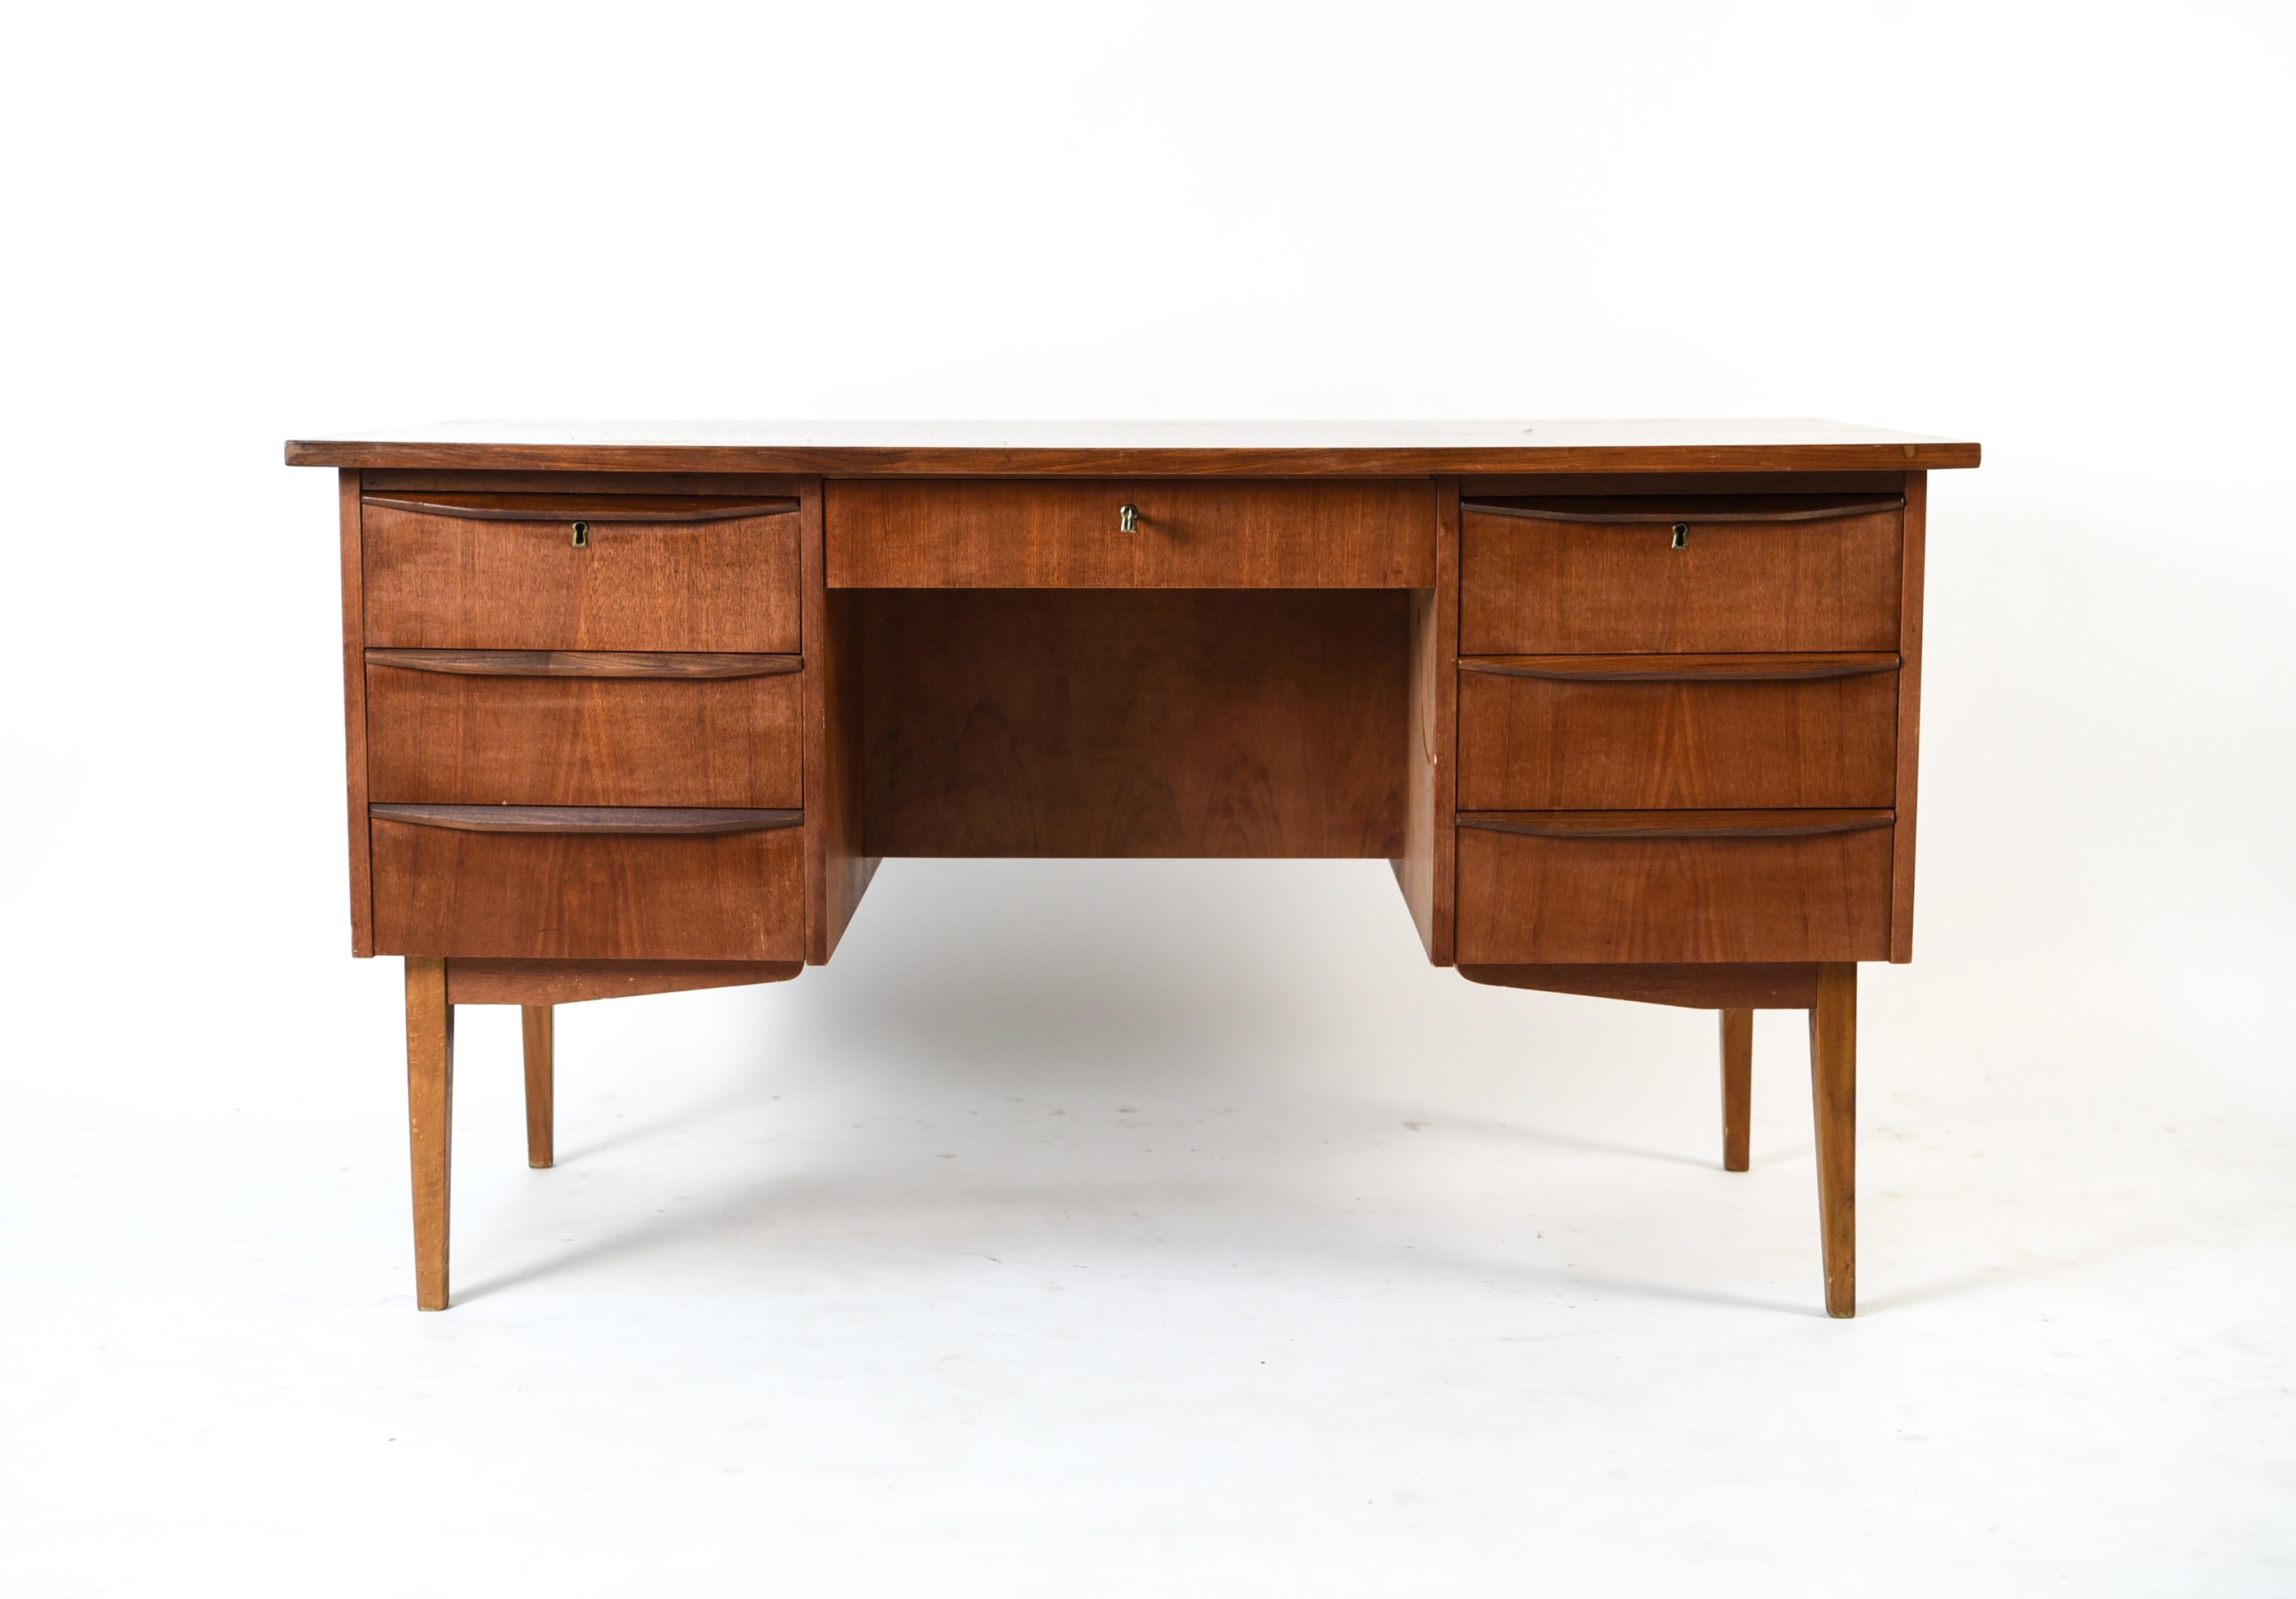 This Danish midcentury teak desk is a great way to incorporate modern Scandinavian design into an office space. This desk has ample storage in its many drawers and compartments, and sits upon slim legs which gives it a light appearance.